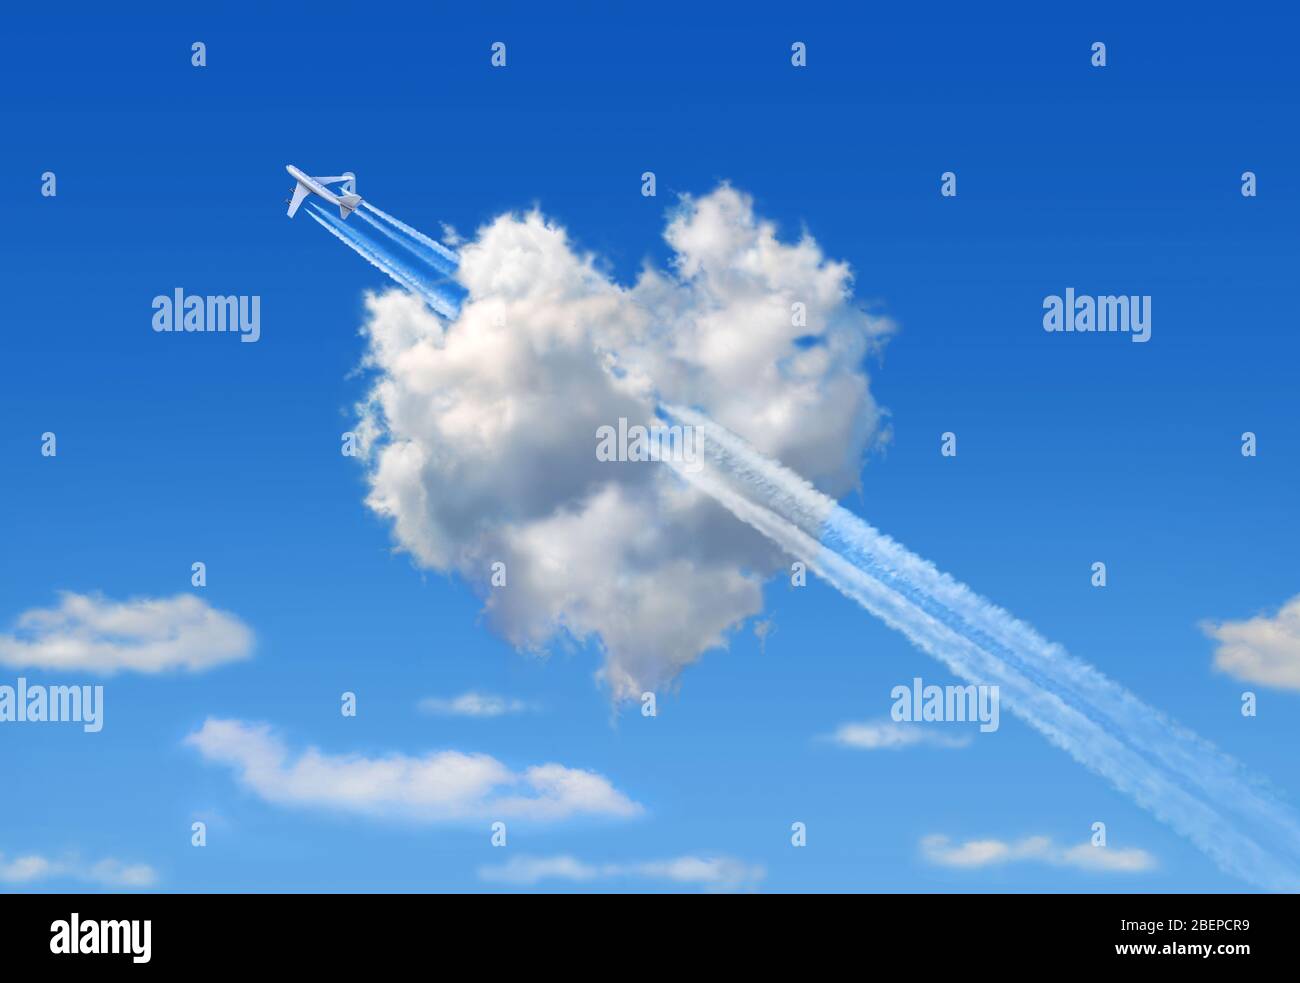 Fluffy cloud with the shape of a heart in a blue sky and a jumbo jet flying through it symbolizing an arrow as love sign. Stock Photo